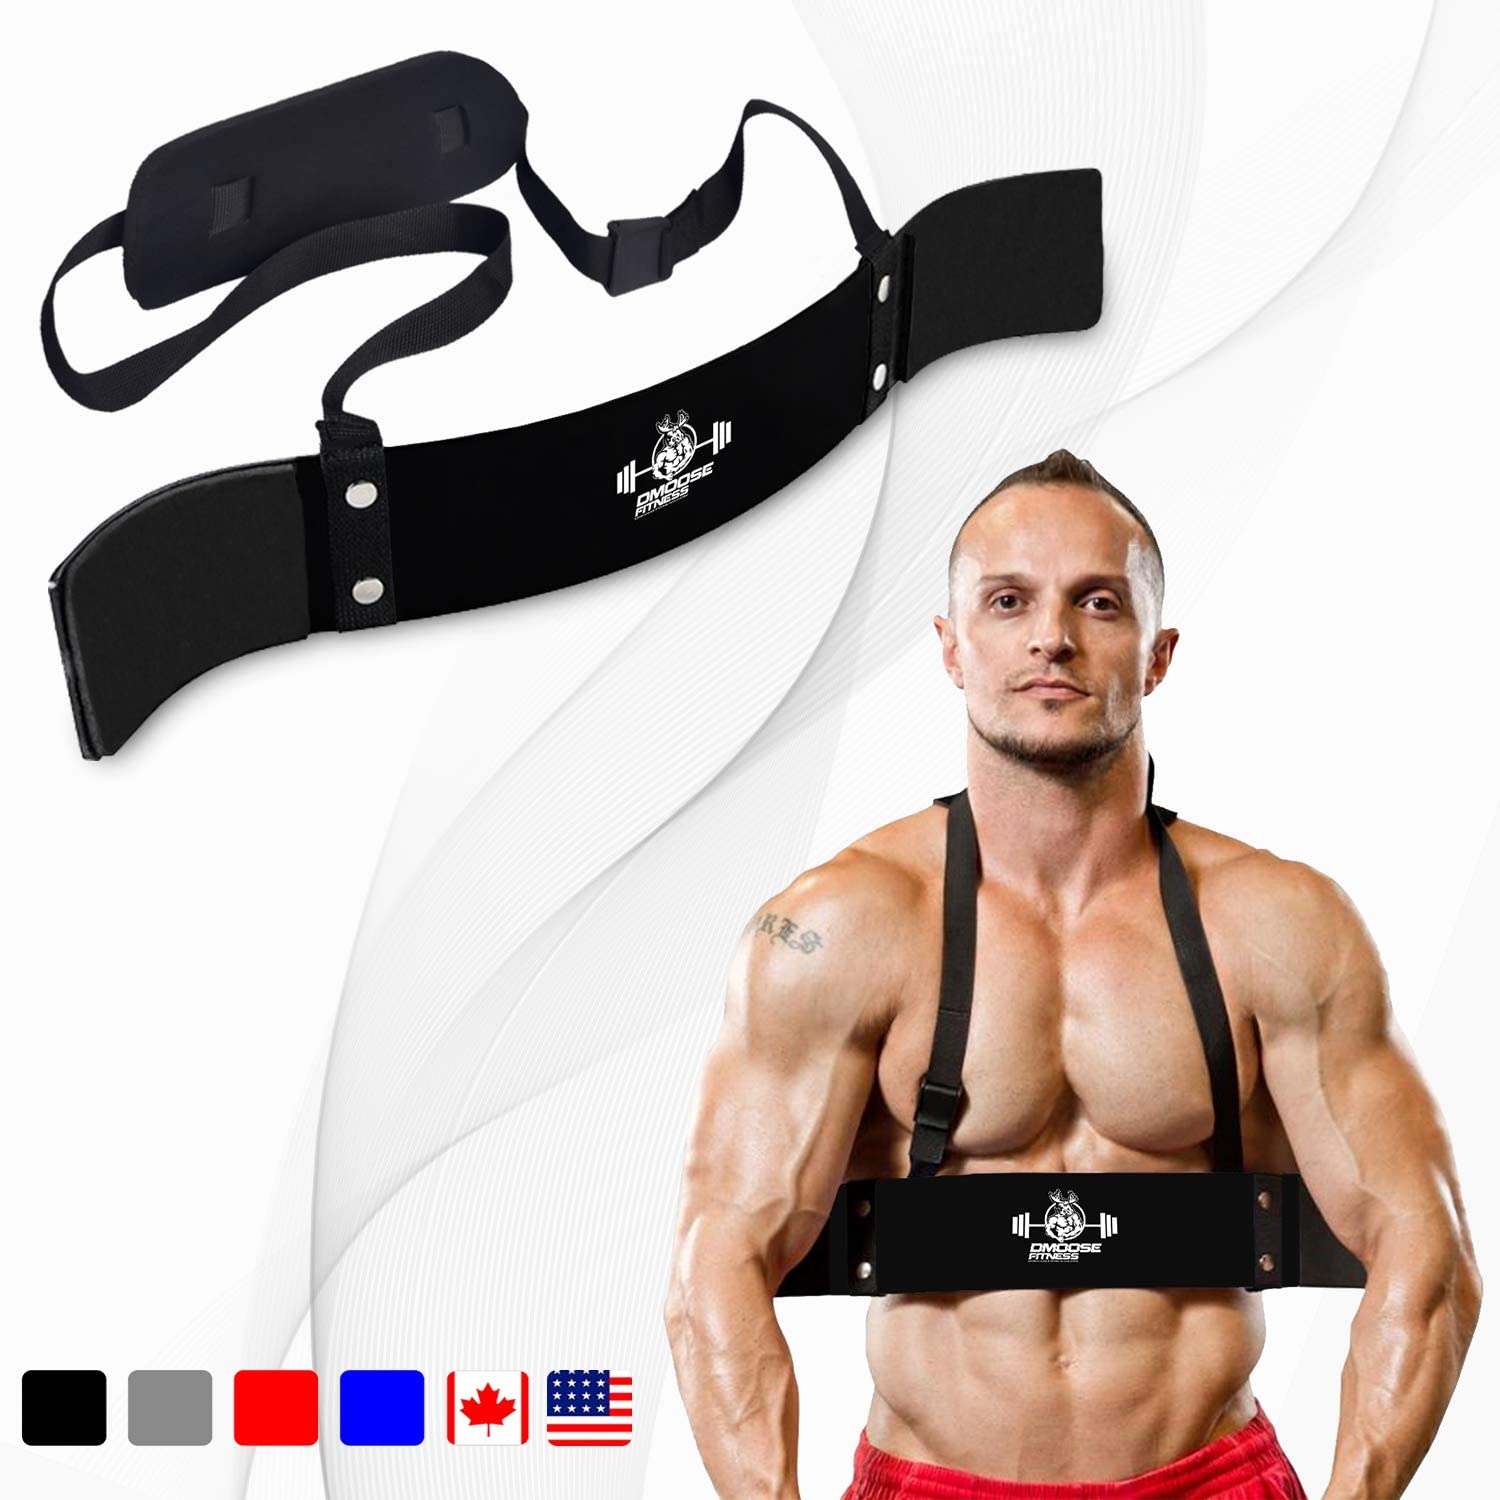 Arm Curl Blaster for Bicep Body Building and Muscle Strength Gains Best Contoured and Adjustable Isolate for Fitness Curling Bodybuilding and Weightlifting Well Balanced Support